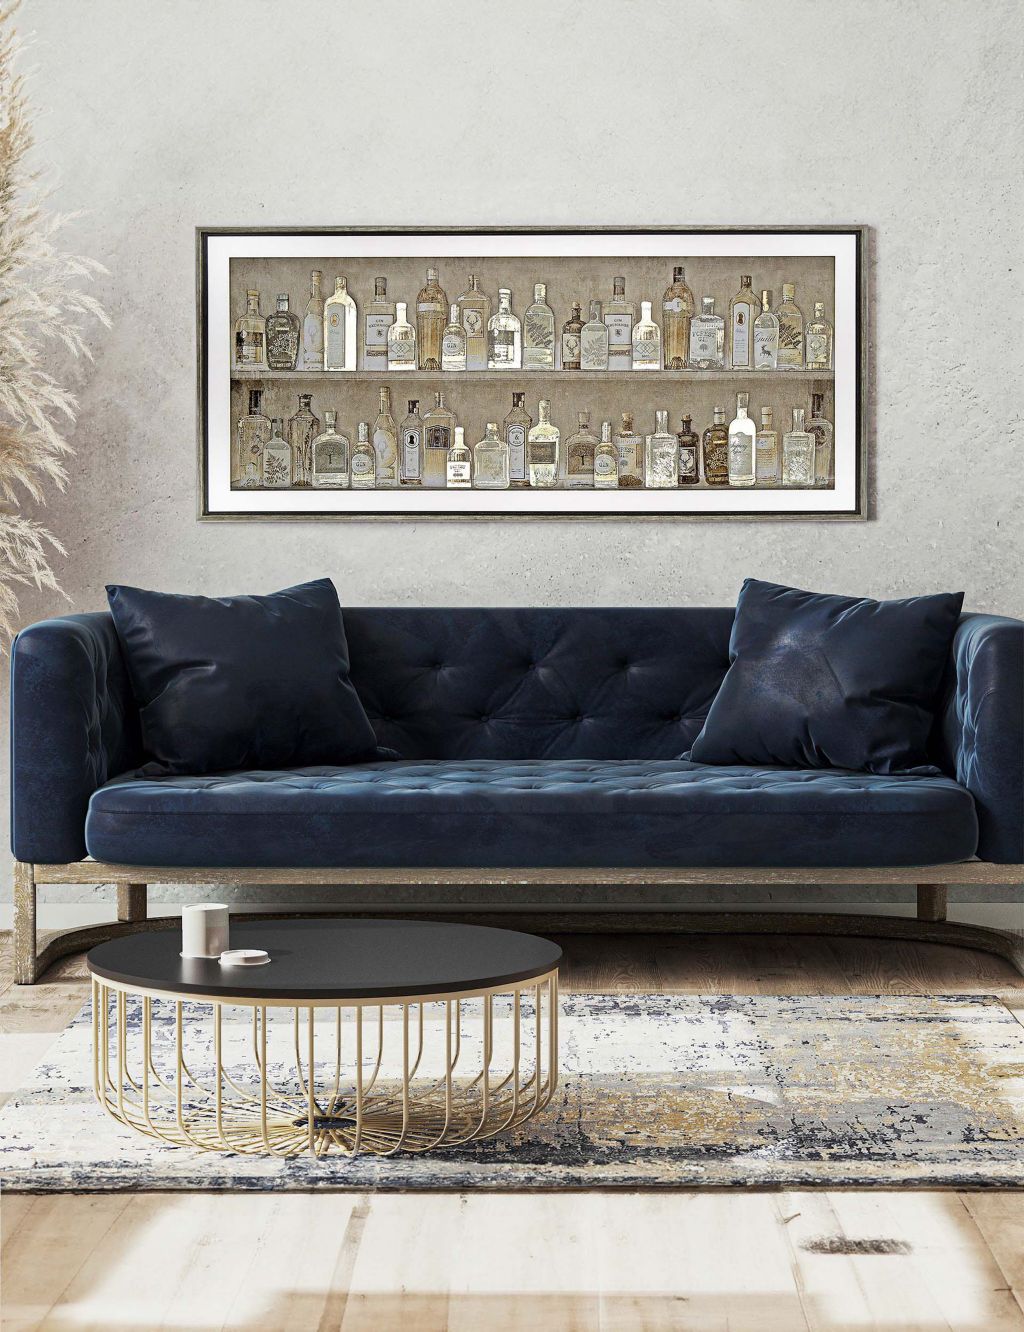 Gin Collection Rectangle Framed Art